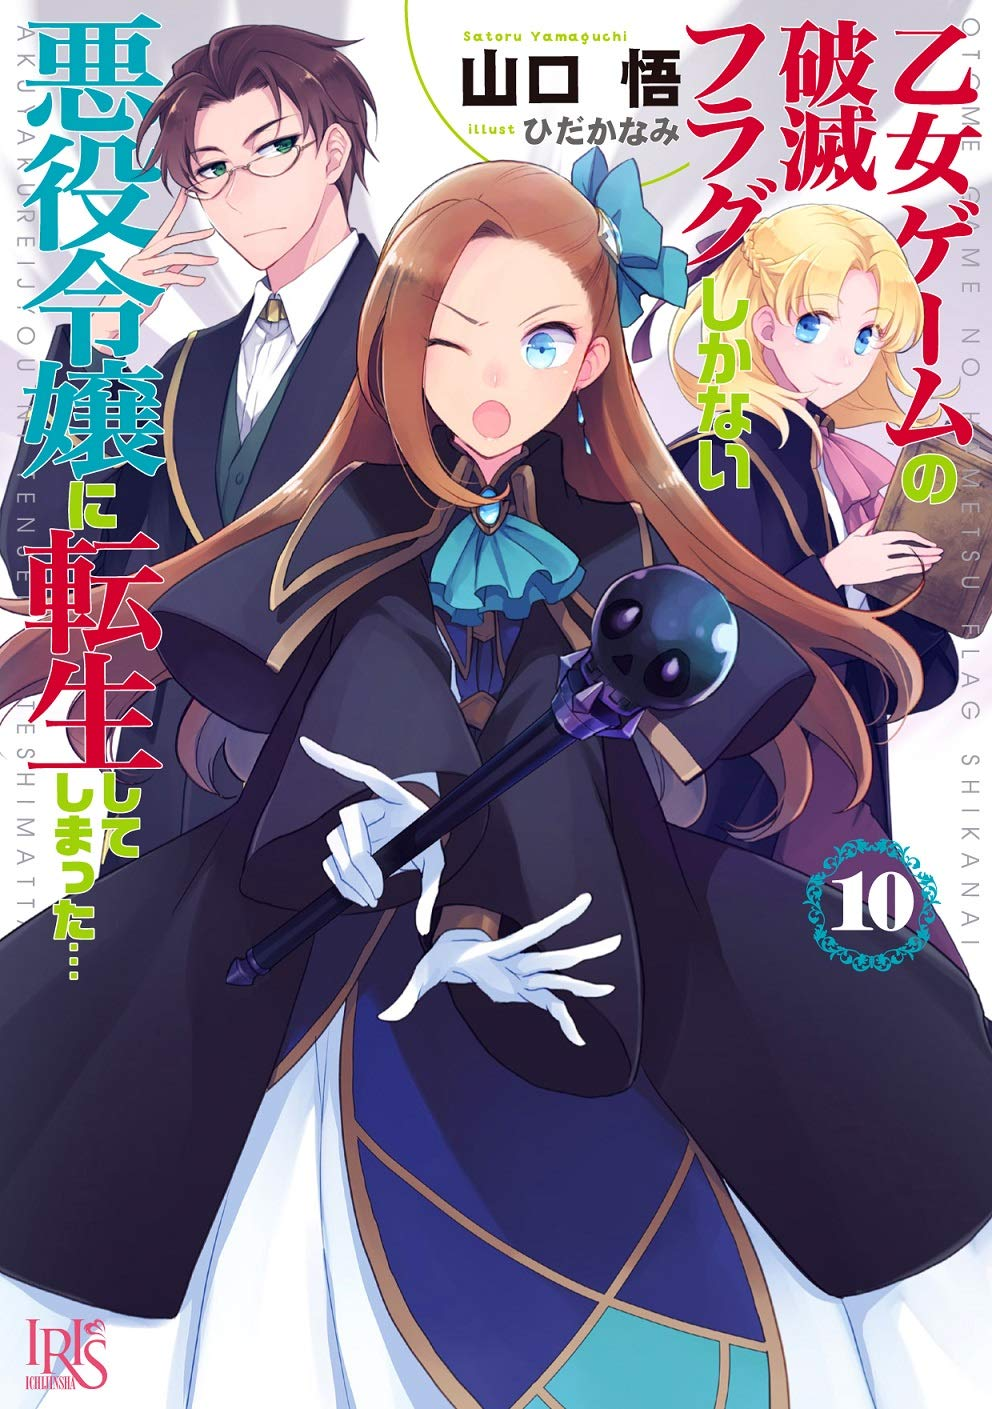 My Next Life as a Villainess: All Routes Lead to Doom! (Manga) Vol. 1